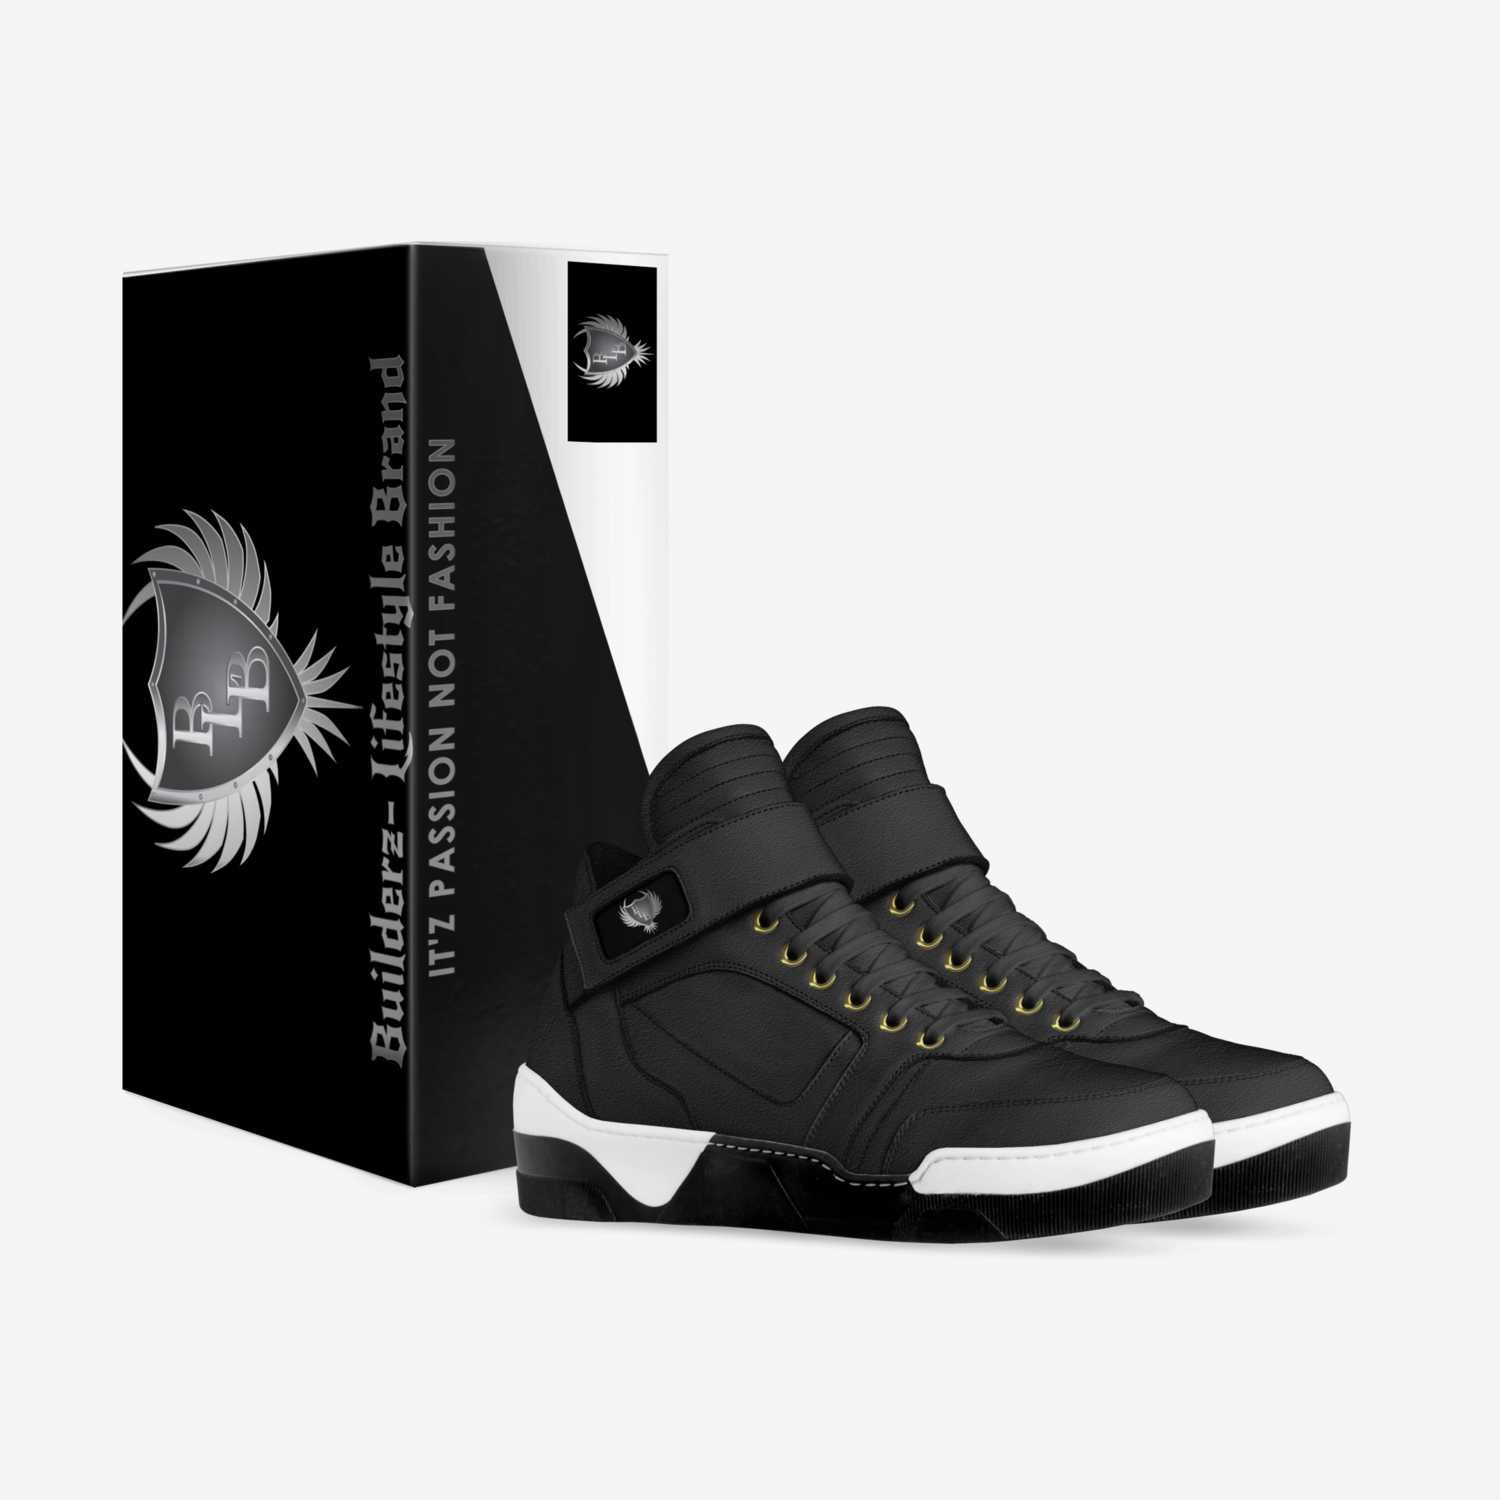 B.U.I.L.D PRINTZ10 custom made in Italy shoes by Anthony Barber (tha Builder) | Box view